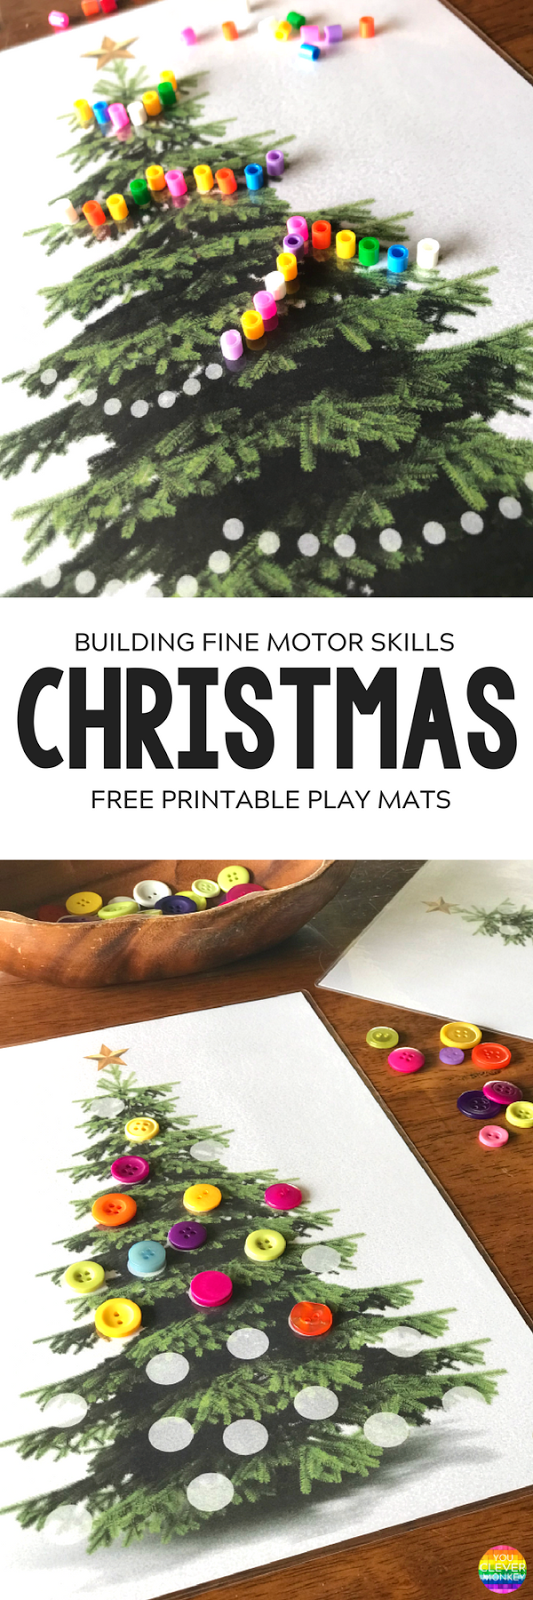 Christmas Fine Motor Skills Mats - build and strengthen fine motor skills with the help of these Christmas themed printable play mats | you clever monkey